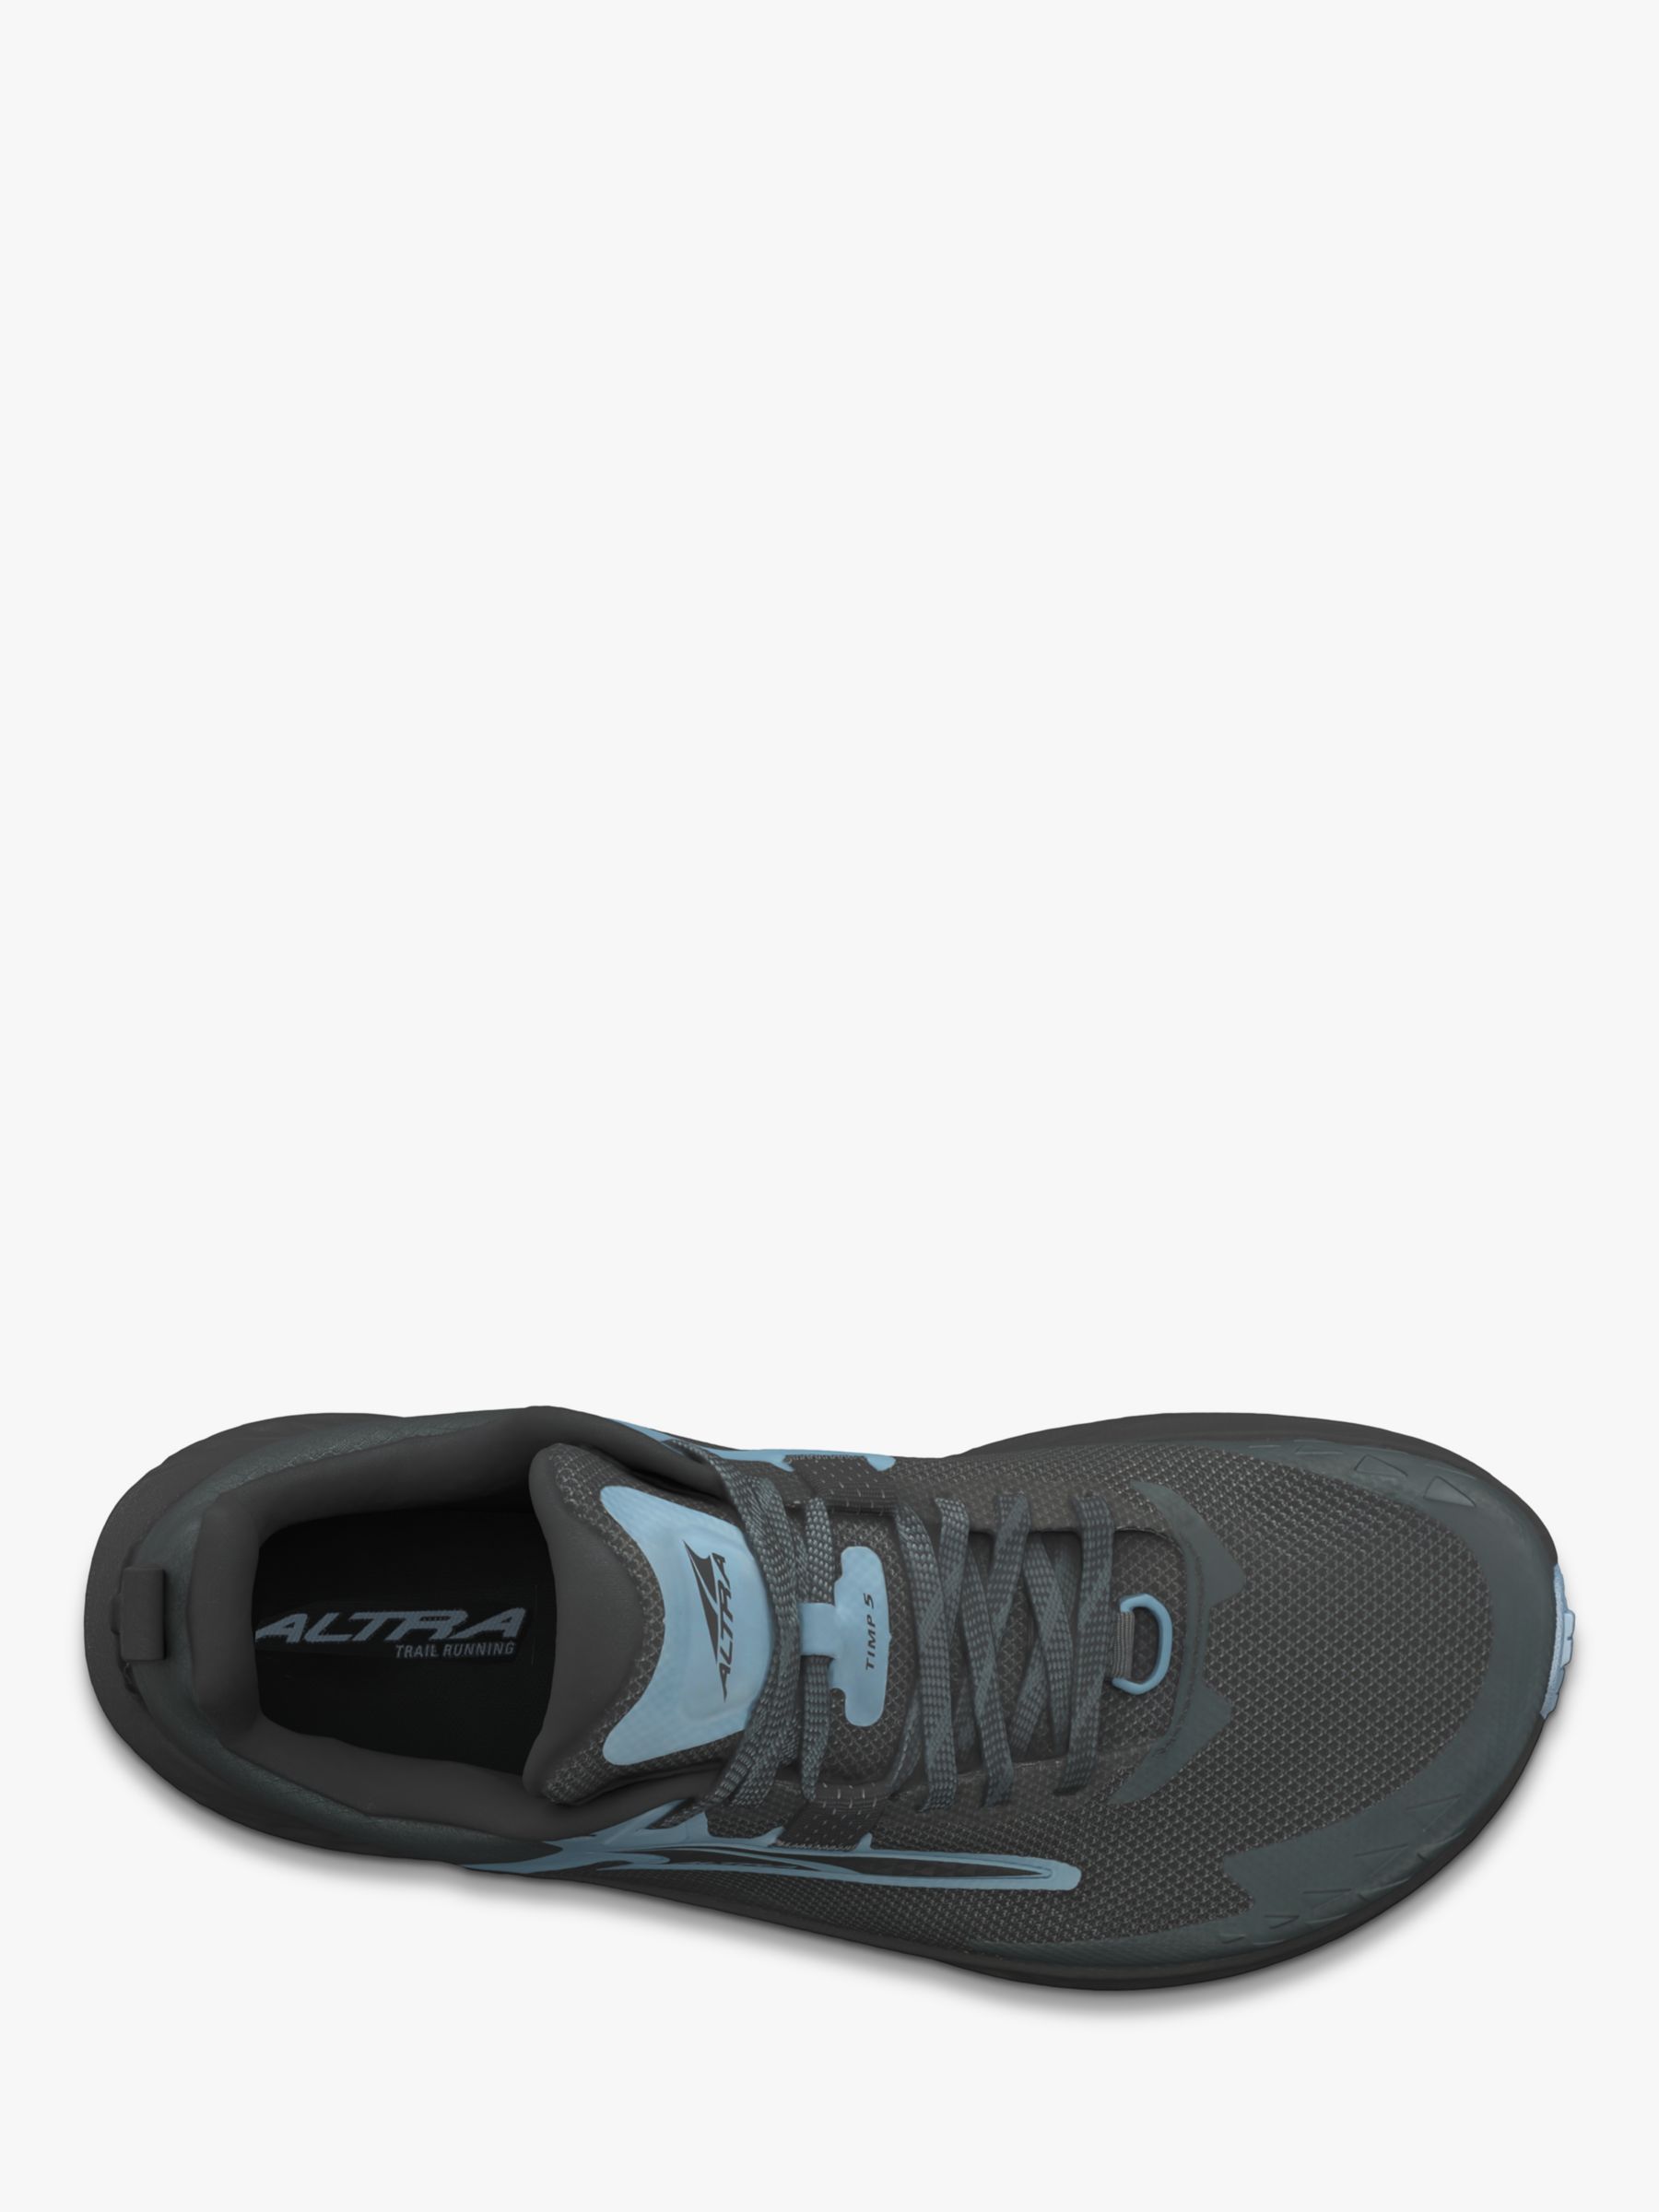 Buy Altra Timp 5 Women's Trail Running Shoes Online at johnlewis.com